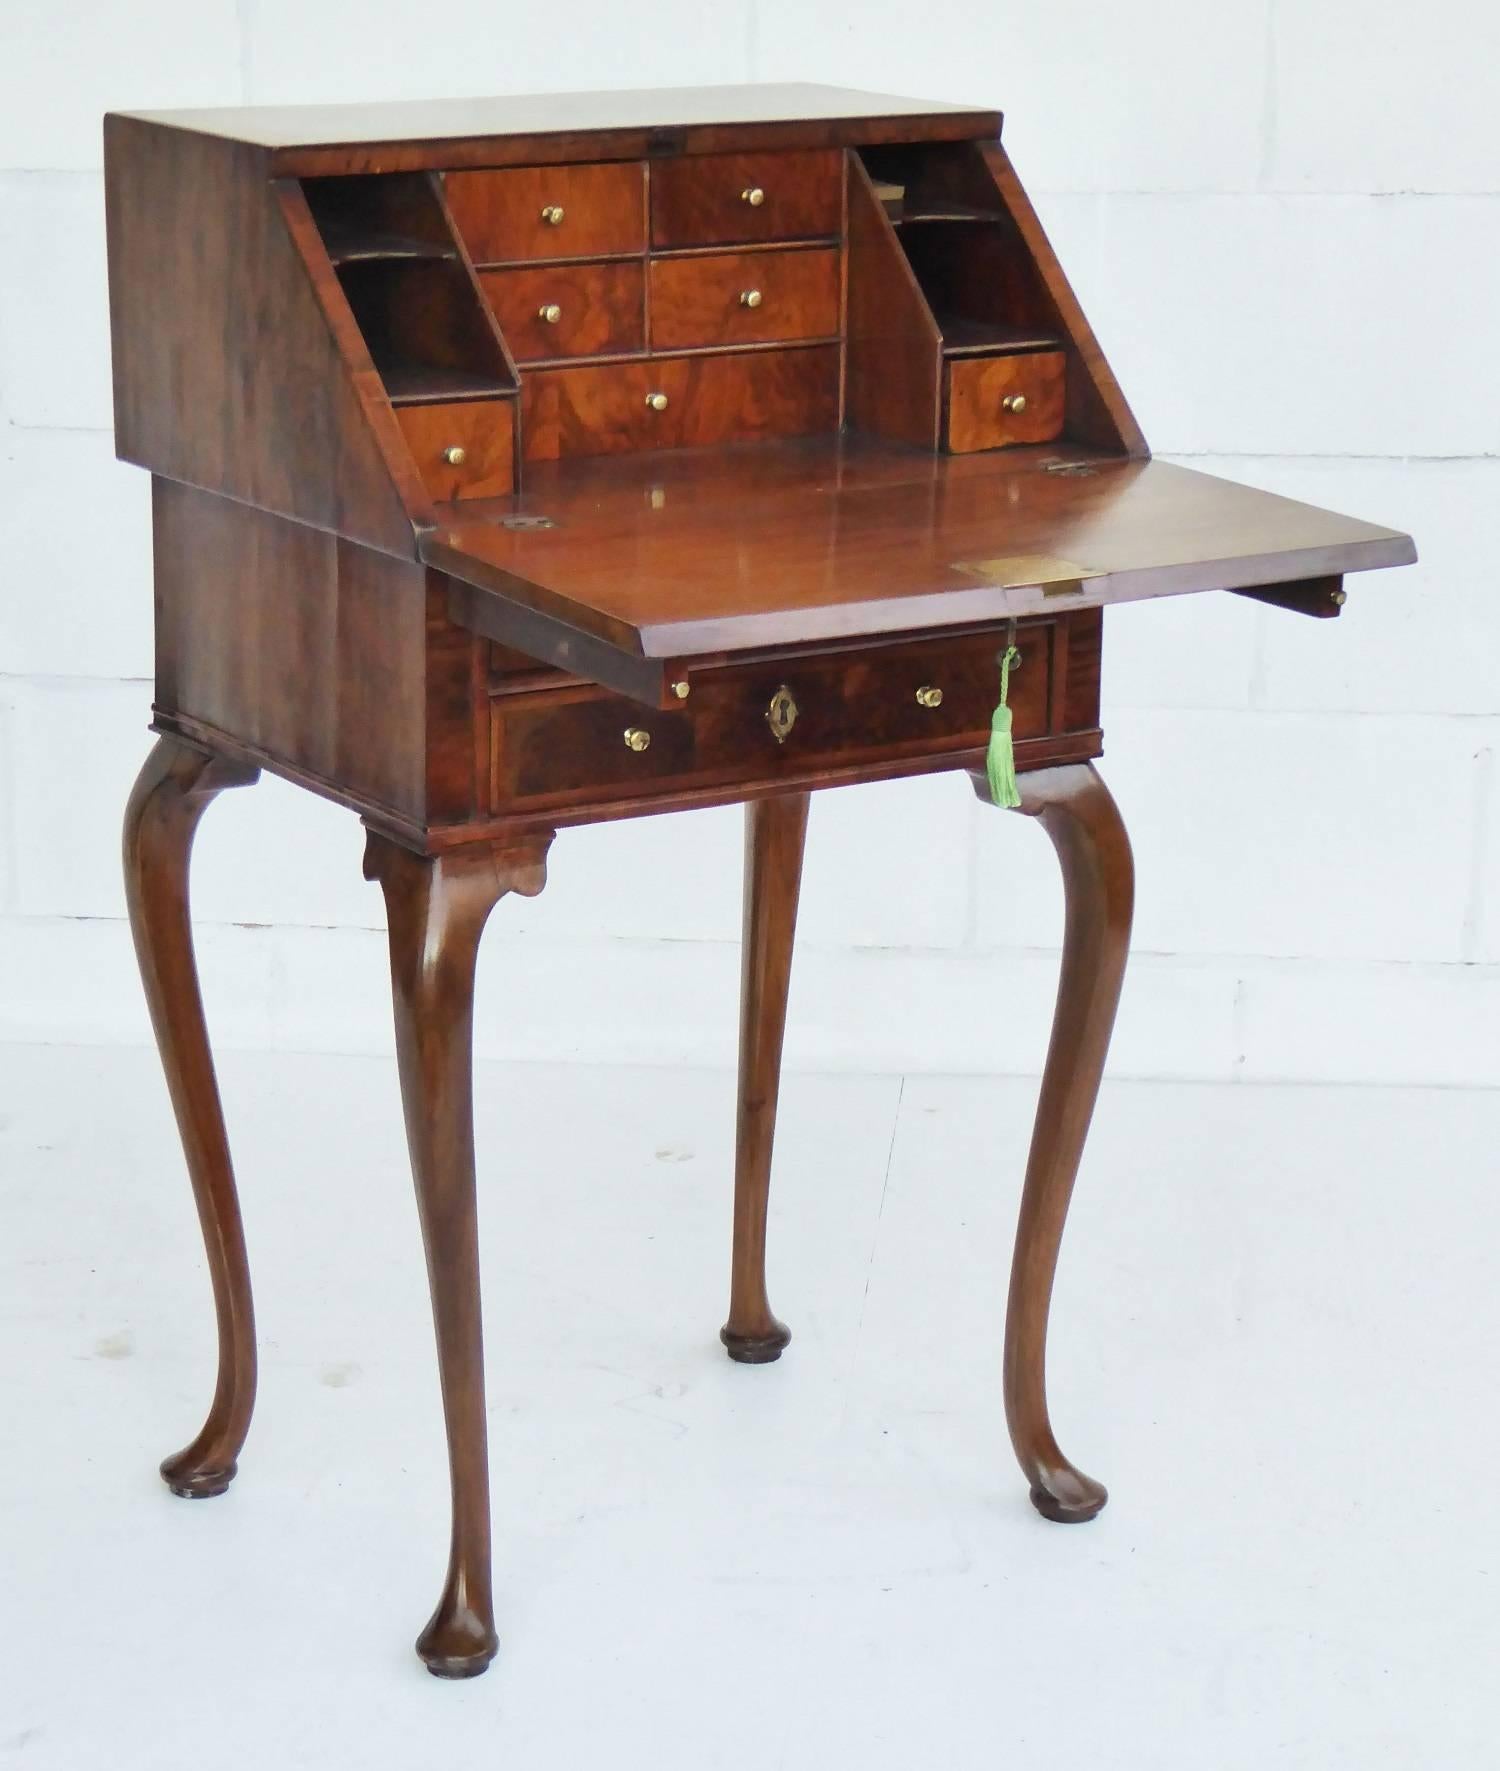 For sale is a Late Victorian walnut ladies bureau in lovely condition having been fully restored and hand polished. The fall pulls down to sit on two pull-out slides and to reveal four small drawers above a single drawer to the centre with a small